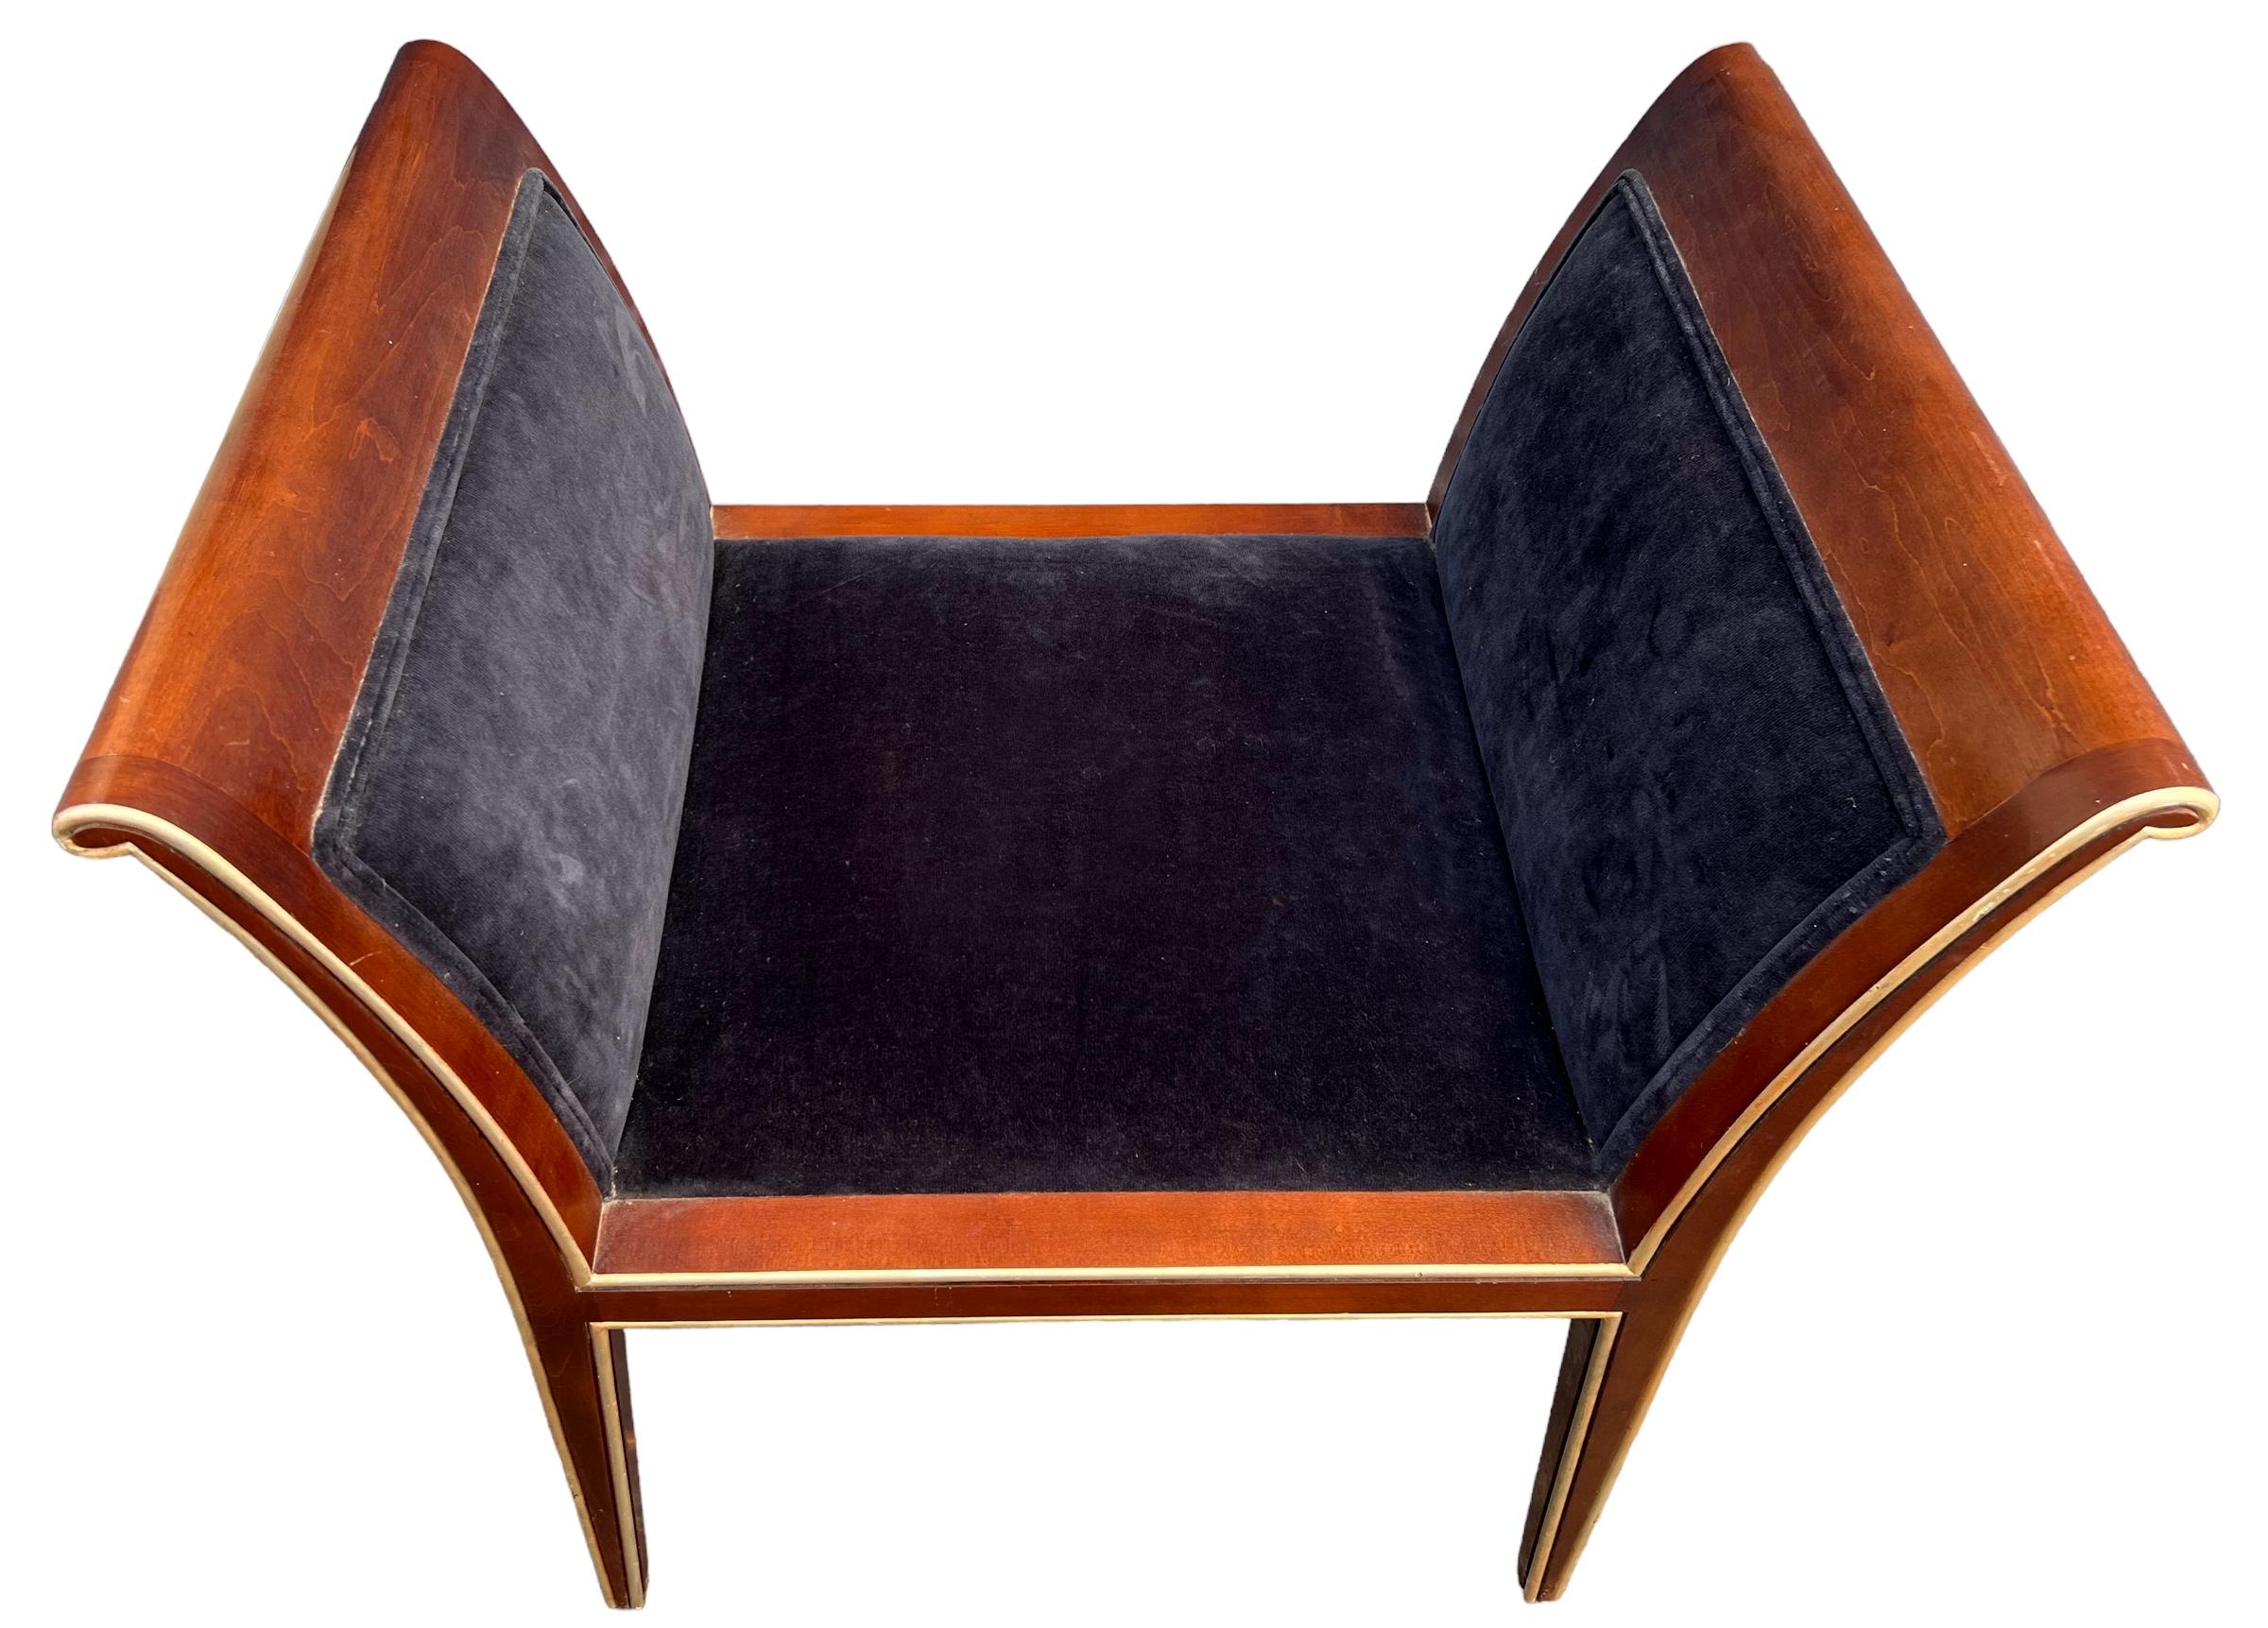 This is a handsome bench. It has Art Deco styling with its sleek mahogany frame. The vintage velvet is in very good condition. It is purported to be Italian but is unmarked.